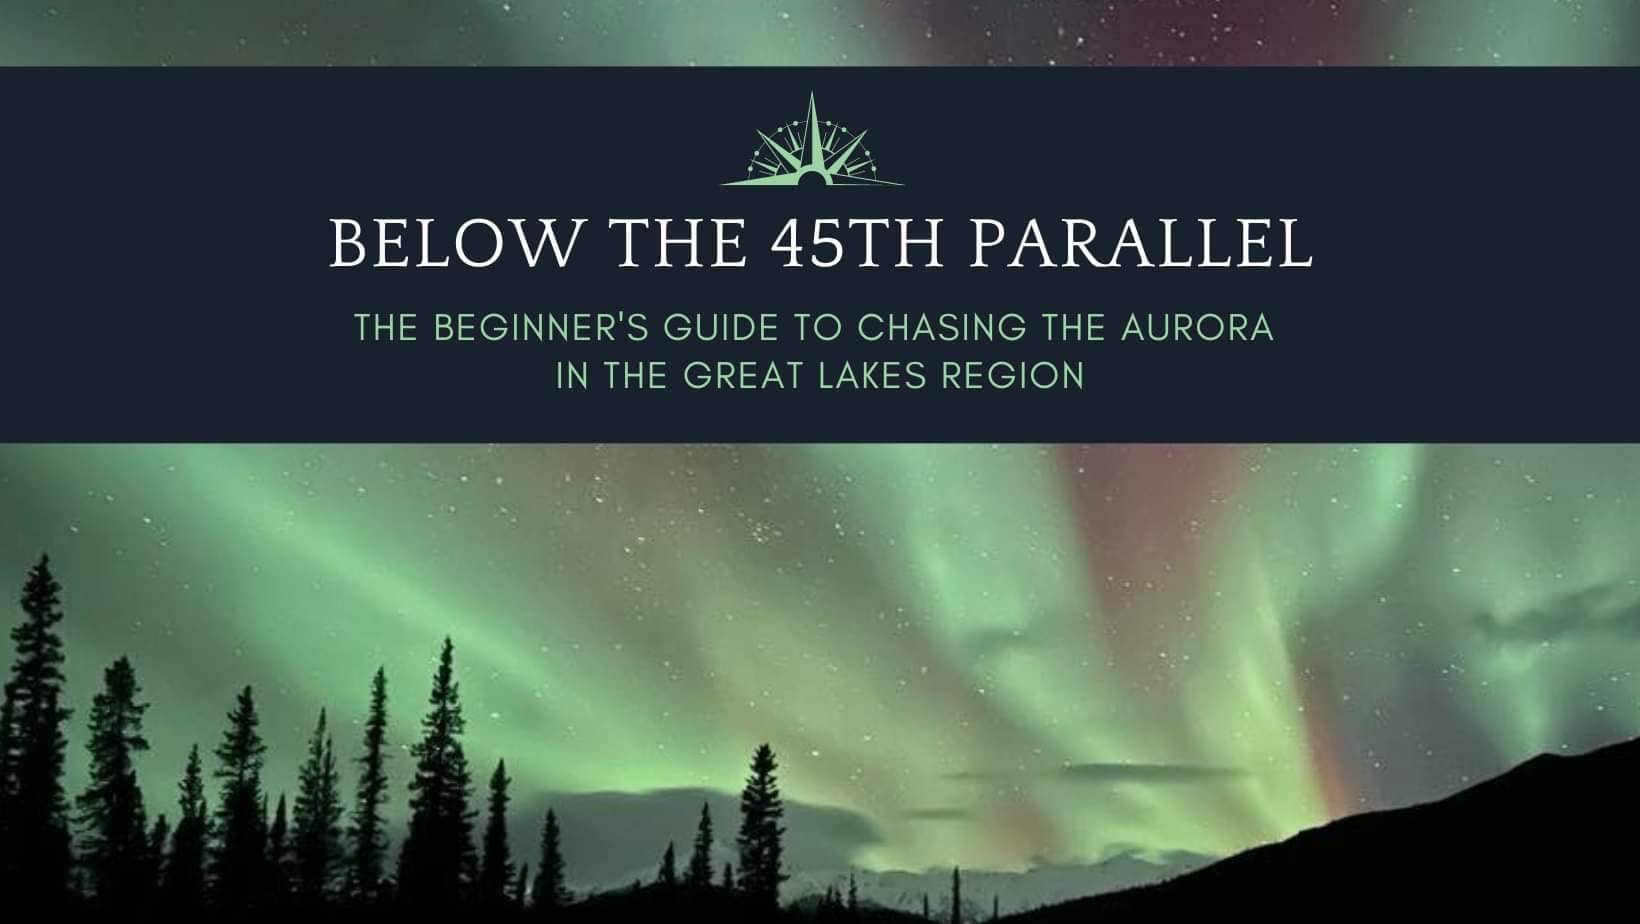 Below the 45th Parallel: The Beginner's Guide to Chasing the Aurora in the Great Lakes Bay Region